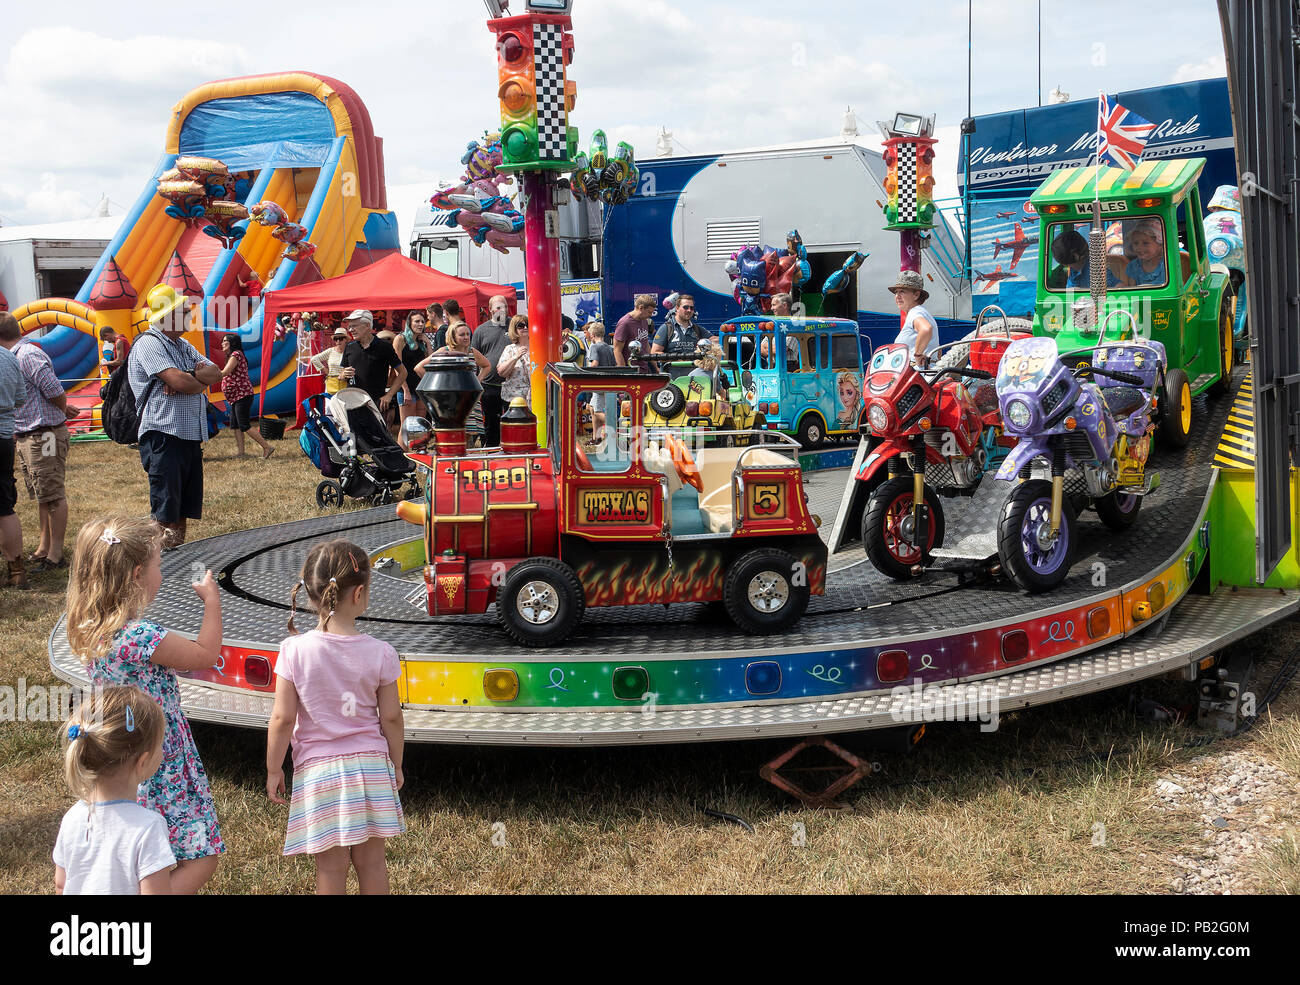 A Roundabout or Carousel for Child Rides on Train, Tractor, Motor Bikes, Bus and Car at Nantwich Agricultural Show Cheshire England United Kingdom UK Stock Photo